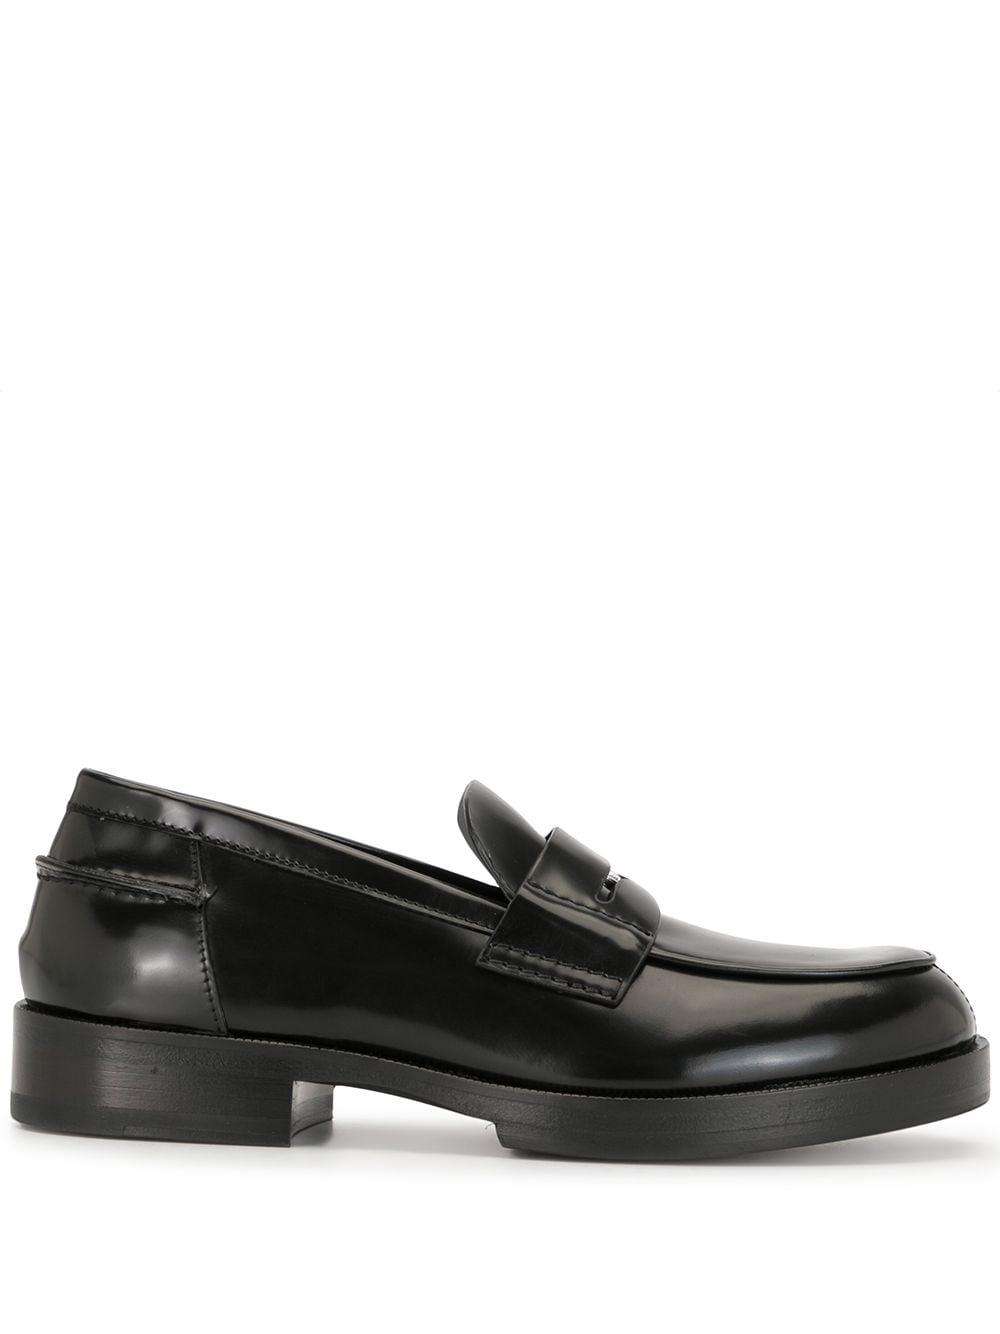 1017 ALYX 9SM Leather Penny Strap Loafers in Black - Lyst